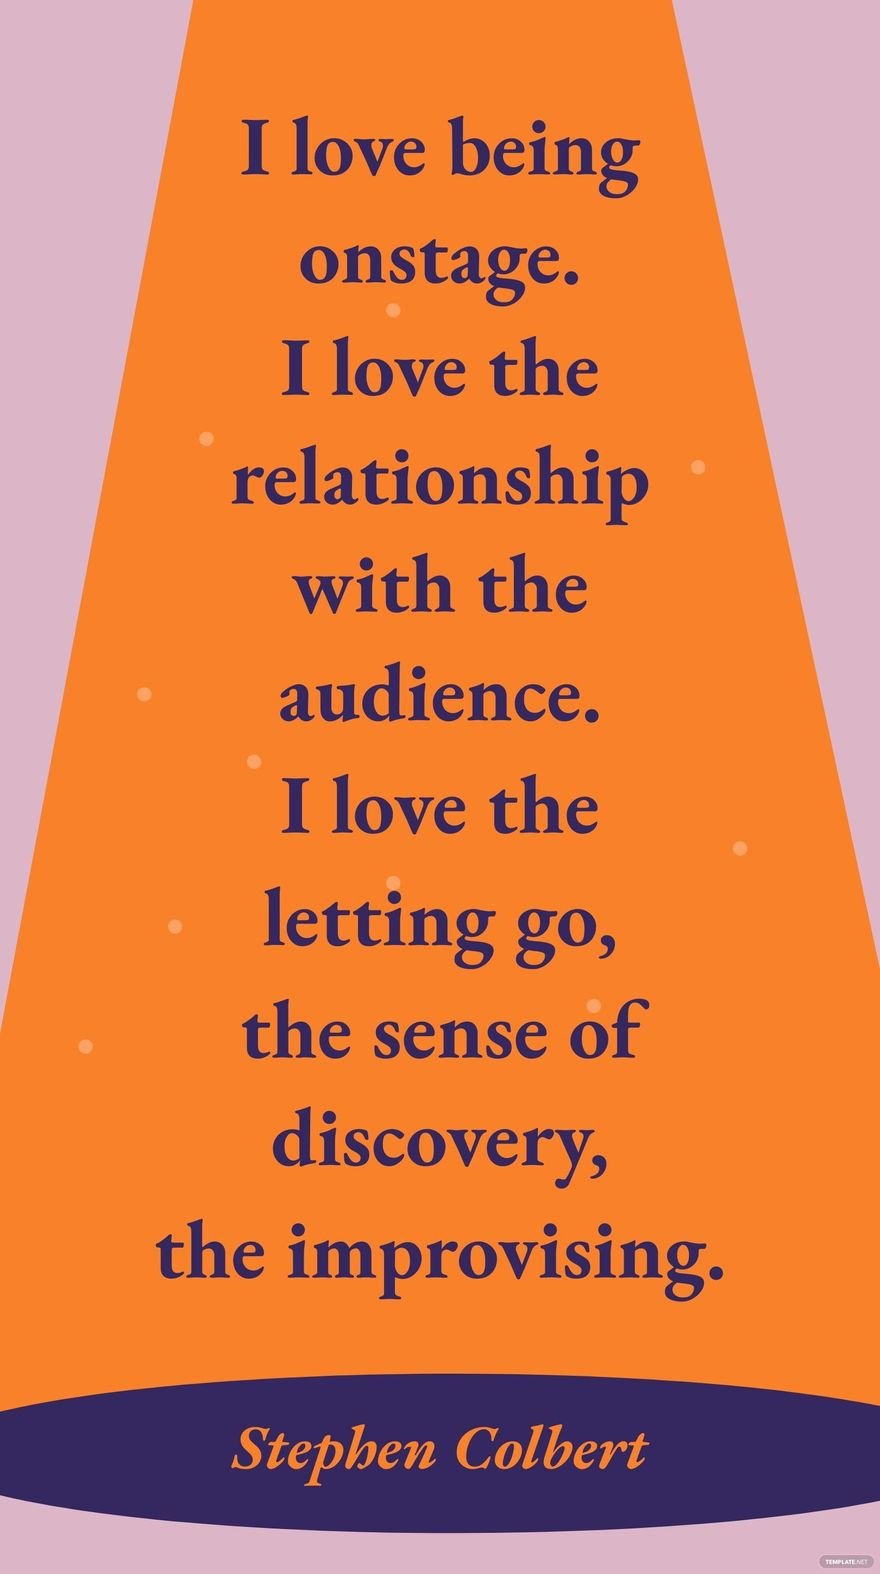 Stephen Colbert - I love being onstage. I love the relationship with the audience. I love the letting go, the sense of discovery, the improvising.